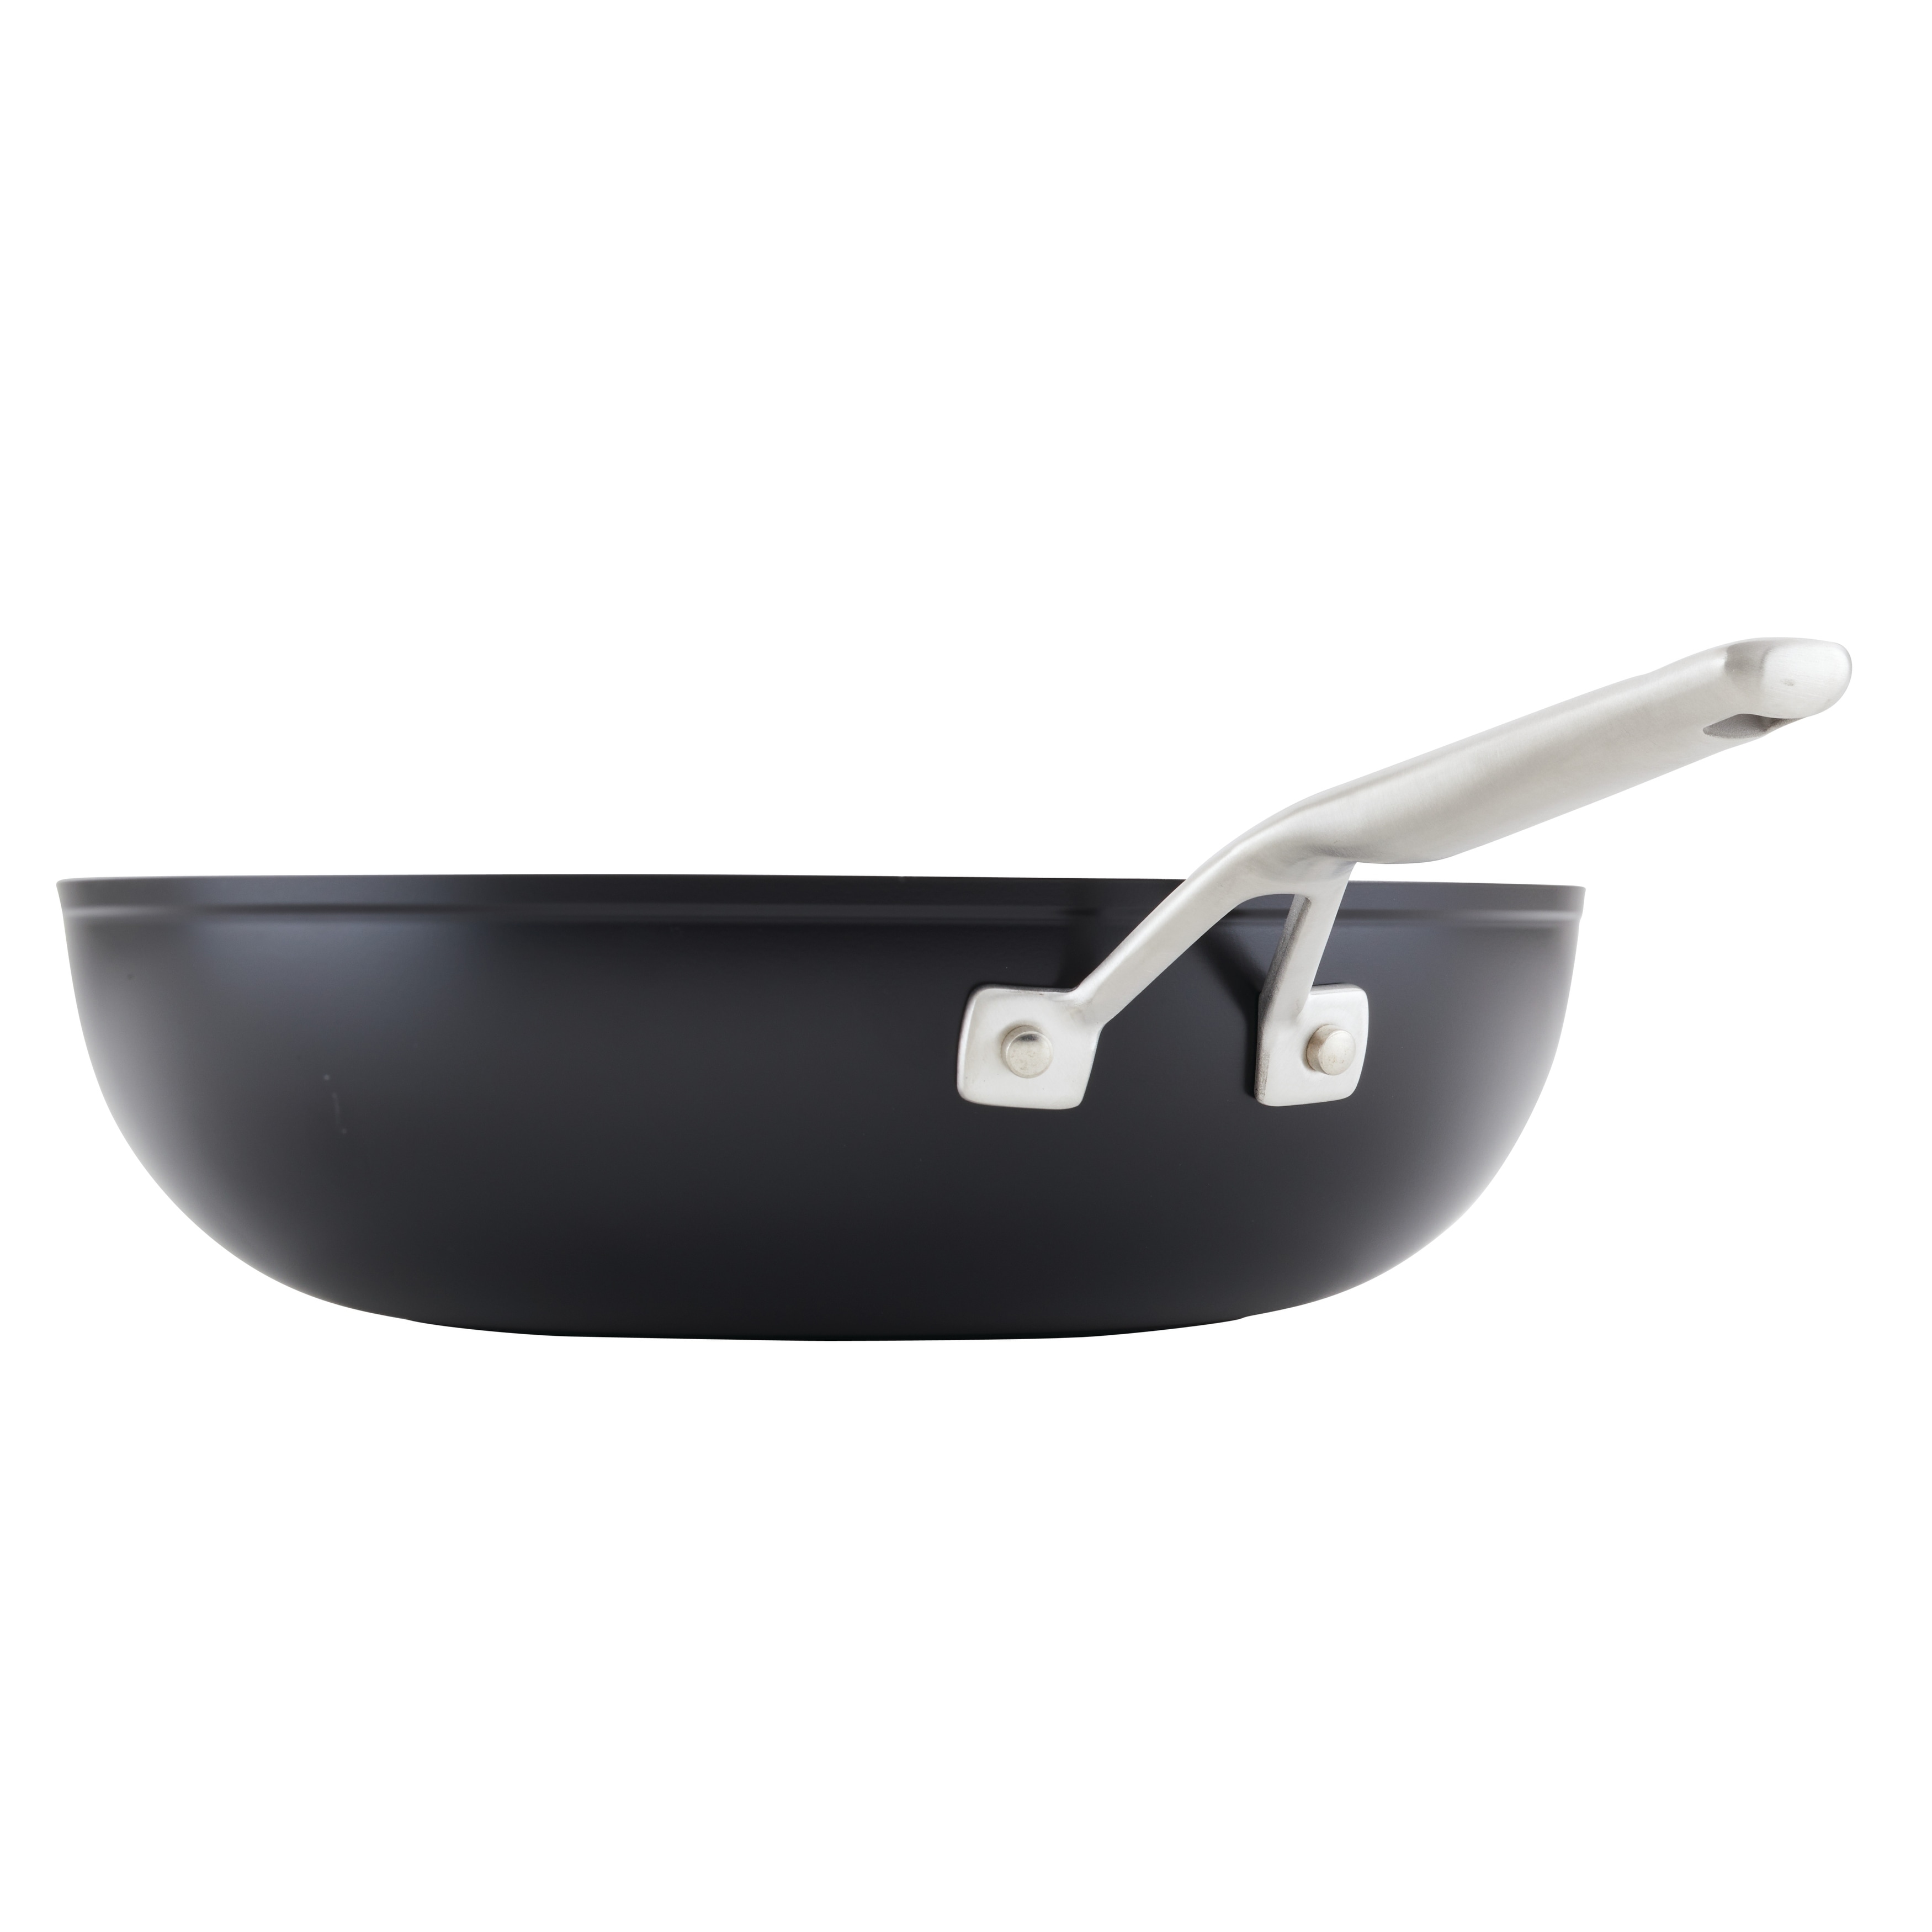 https://ak1.ostkcdn.com/images/products/is/images/direct/fbbe4553a0347db6e198b00ce5fb642bbd4dad2a/KitchenAid-Hard-Anodized-Induction-Nonstick-Stir-Fry-Pan---Wok-with-Helper-Handle%2C-12.25-Inch%2C-Matte-Black.jpg